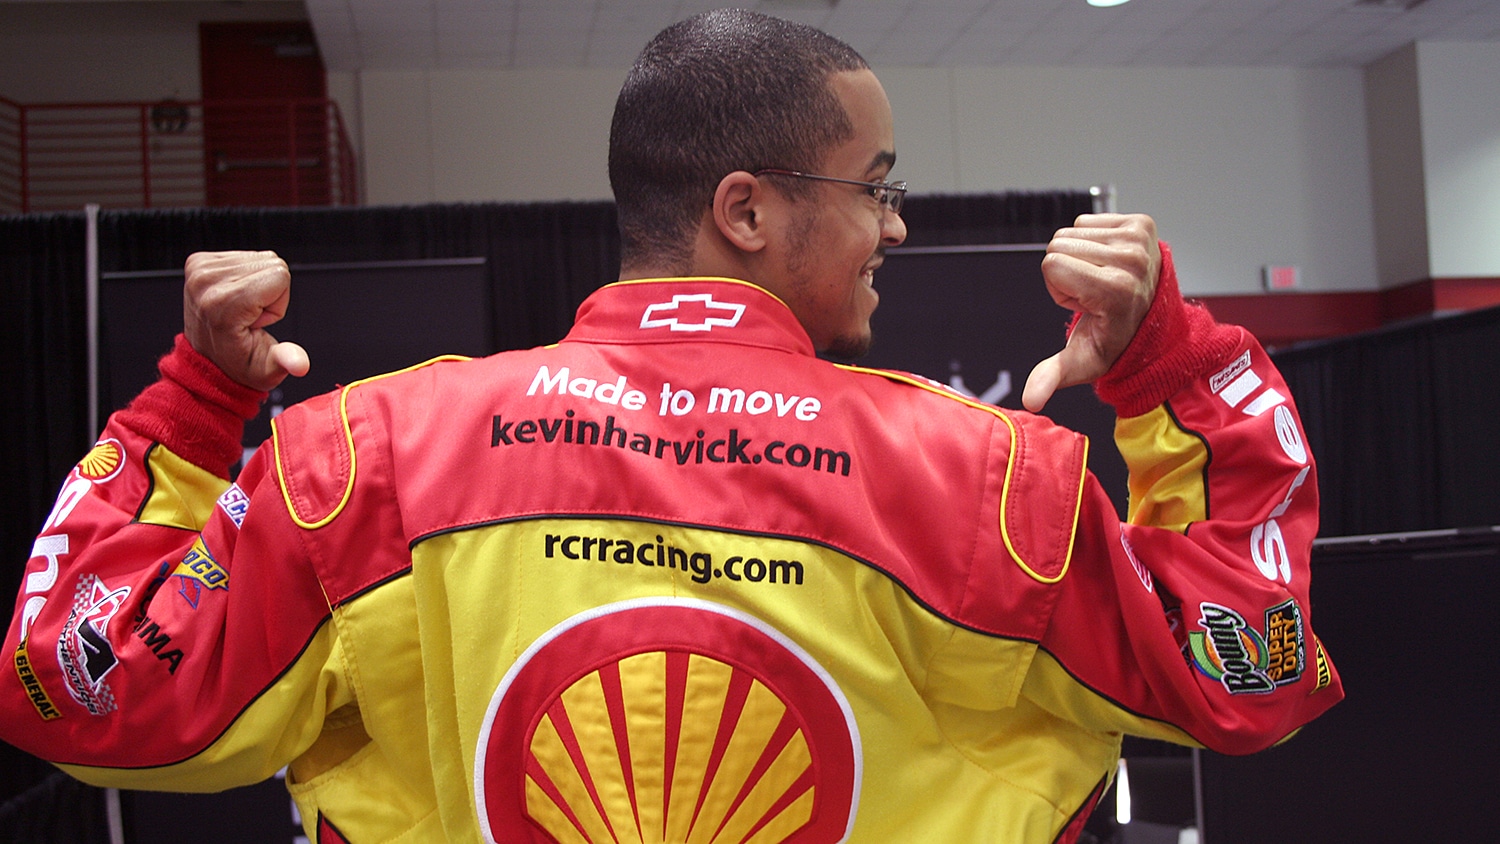 Sean Coleman showing the back of his racing jacket with a Shell logo.